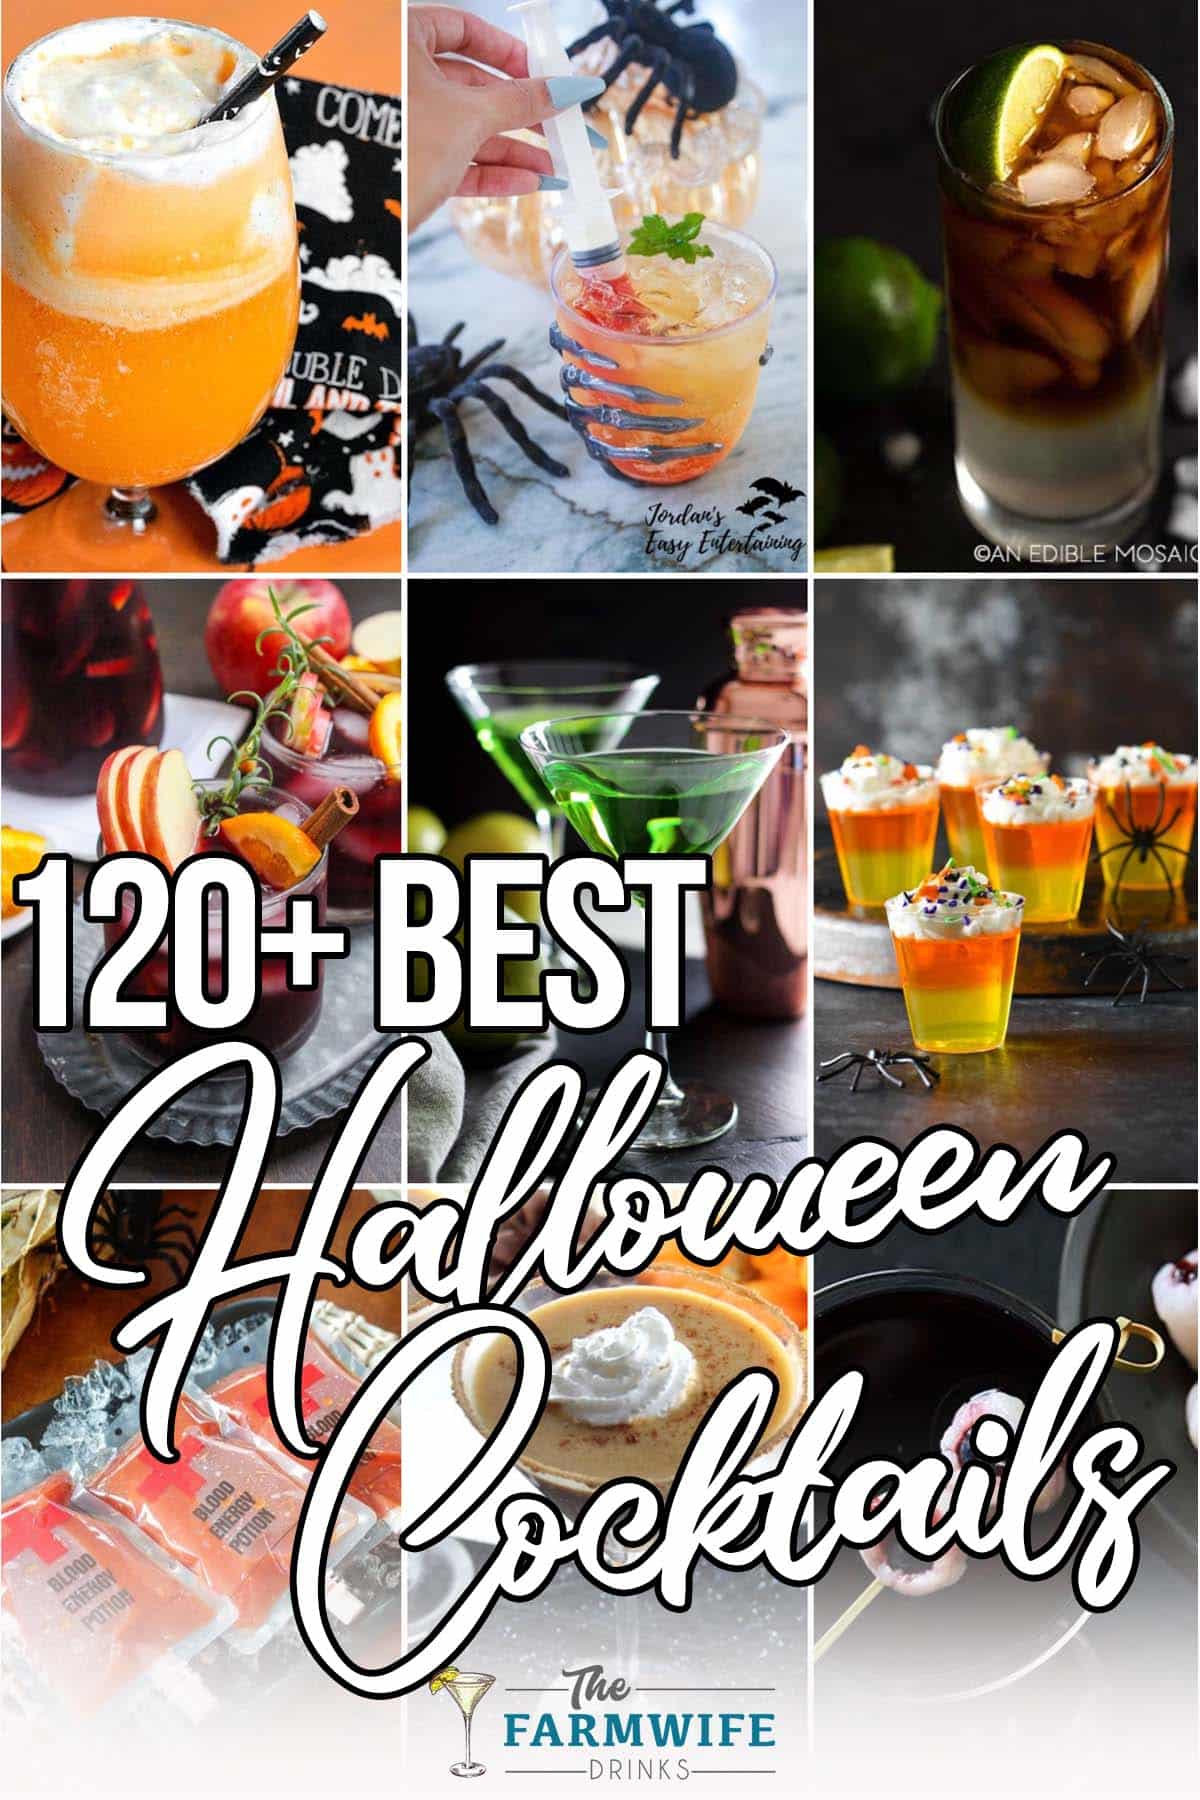 photo collage of halloween beverages with text which reads 120+ best halloween cocktails